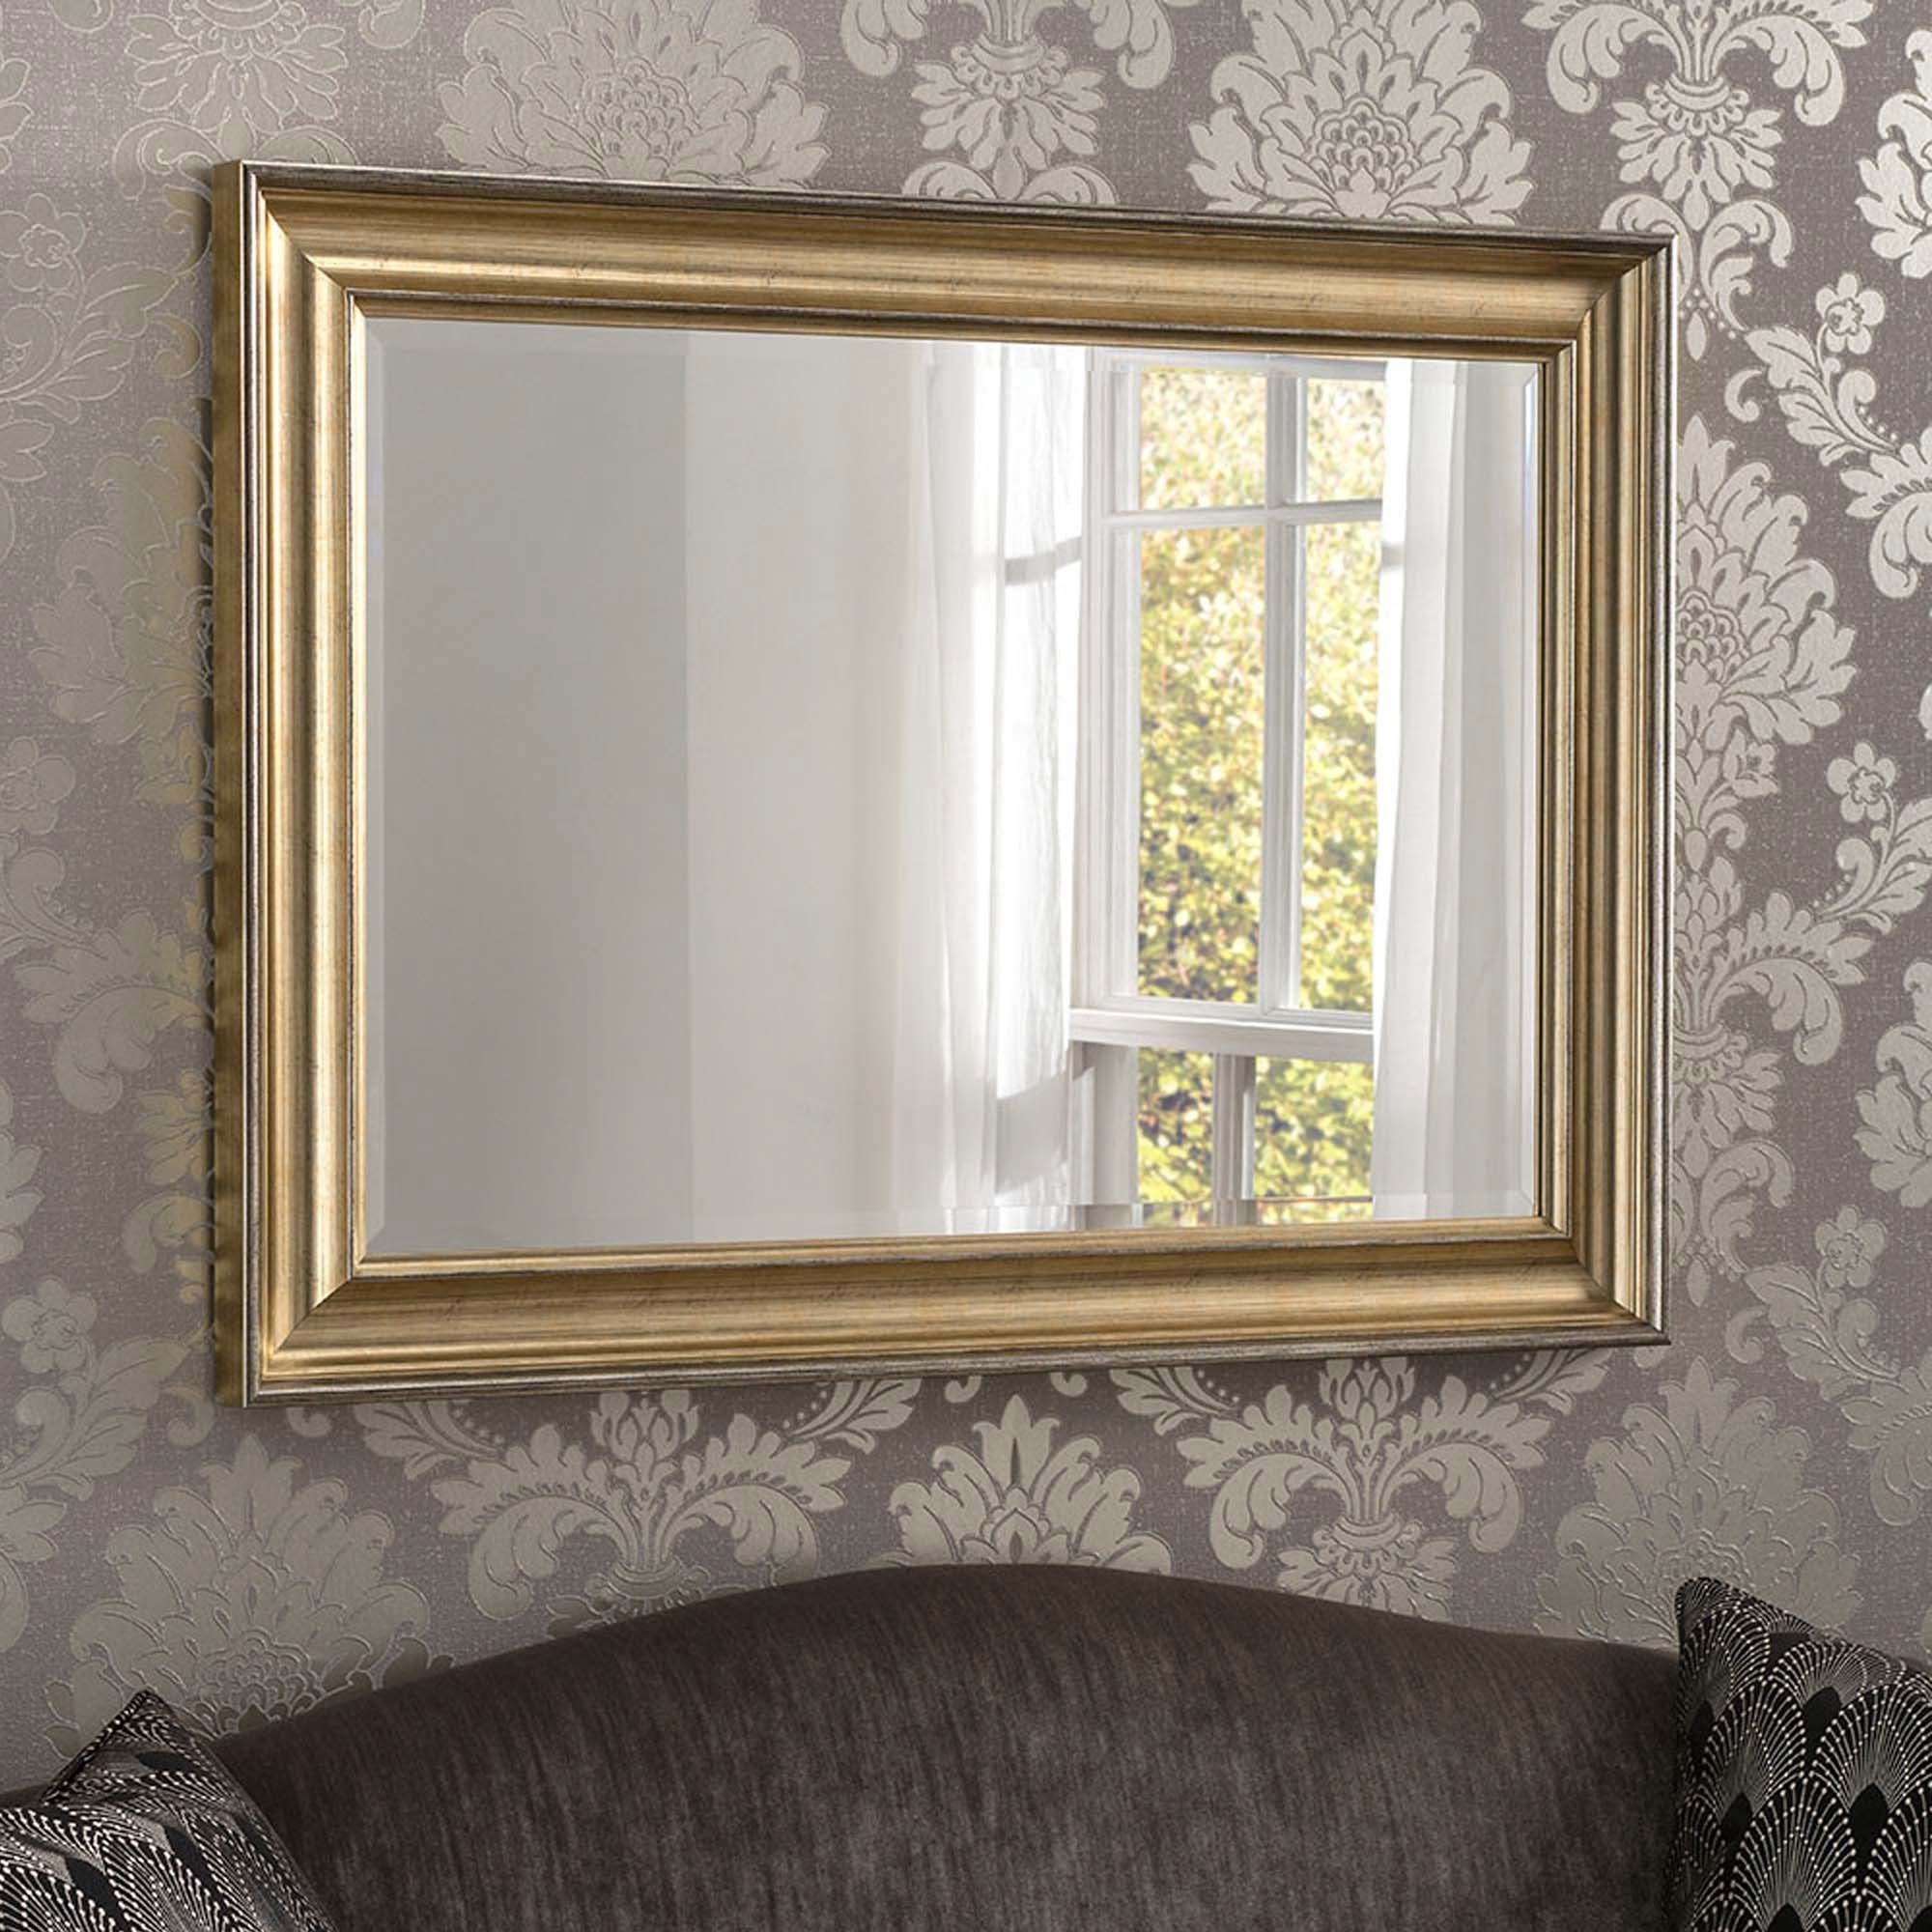 Decorative Rectangular Wall Mirrors Throughout Current Decorative Champagne Rectangular Wall Mirror (View 13 of 20)